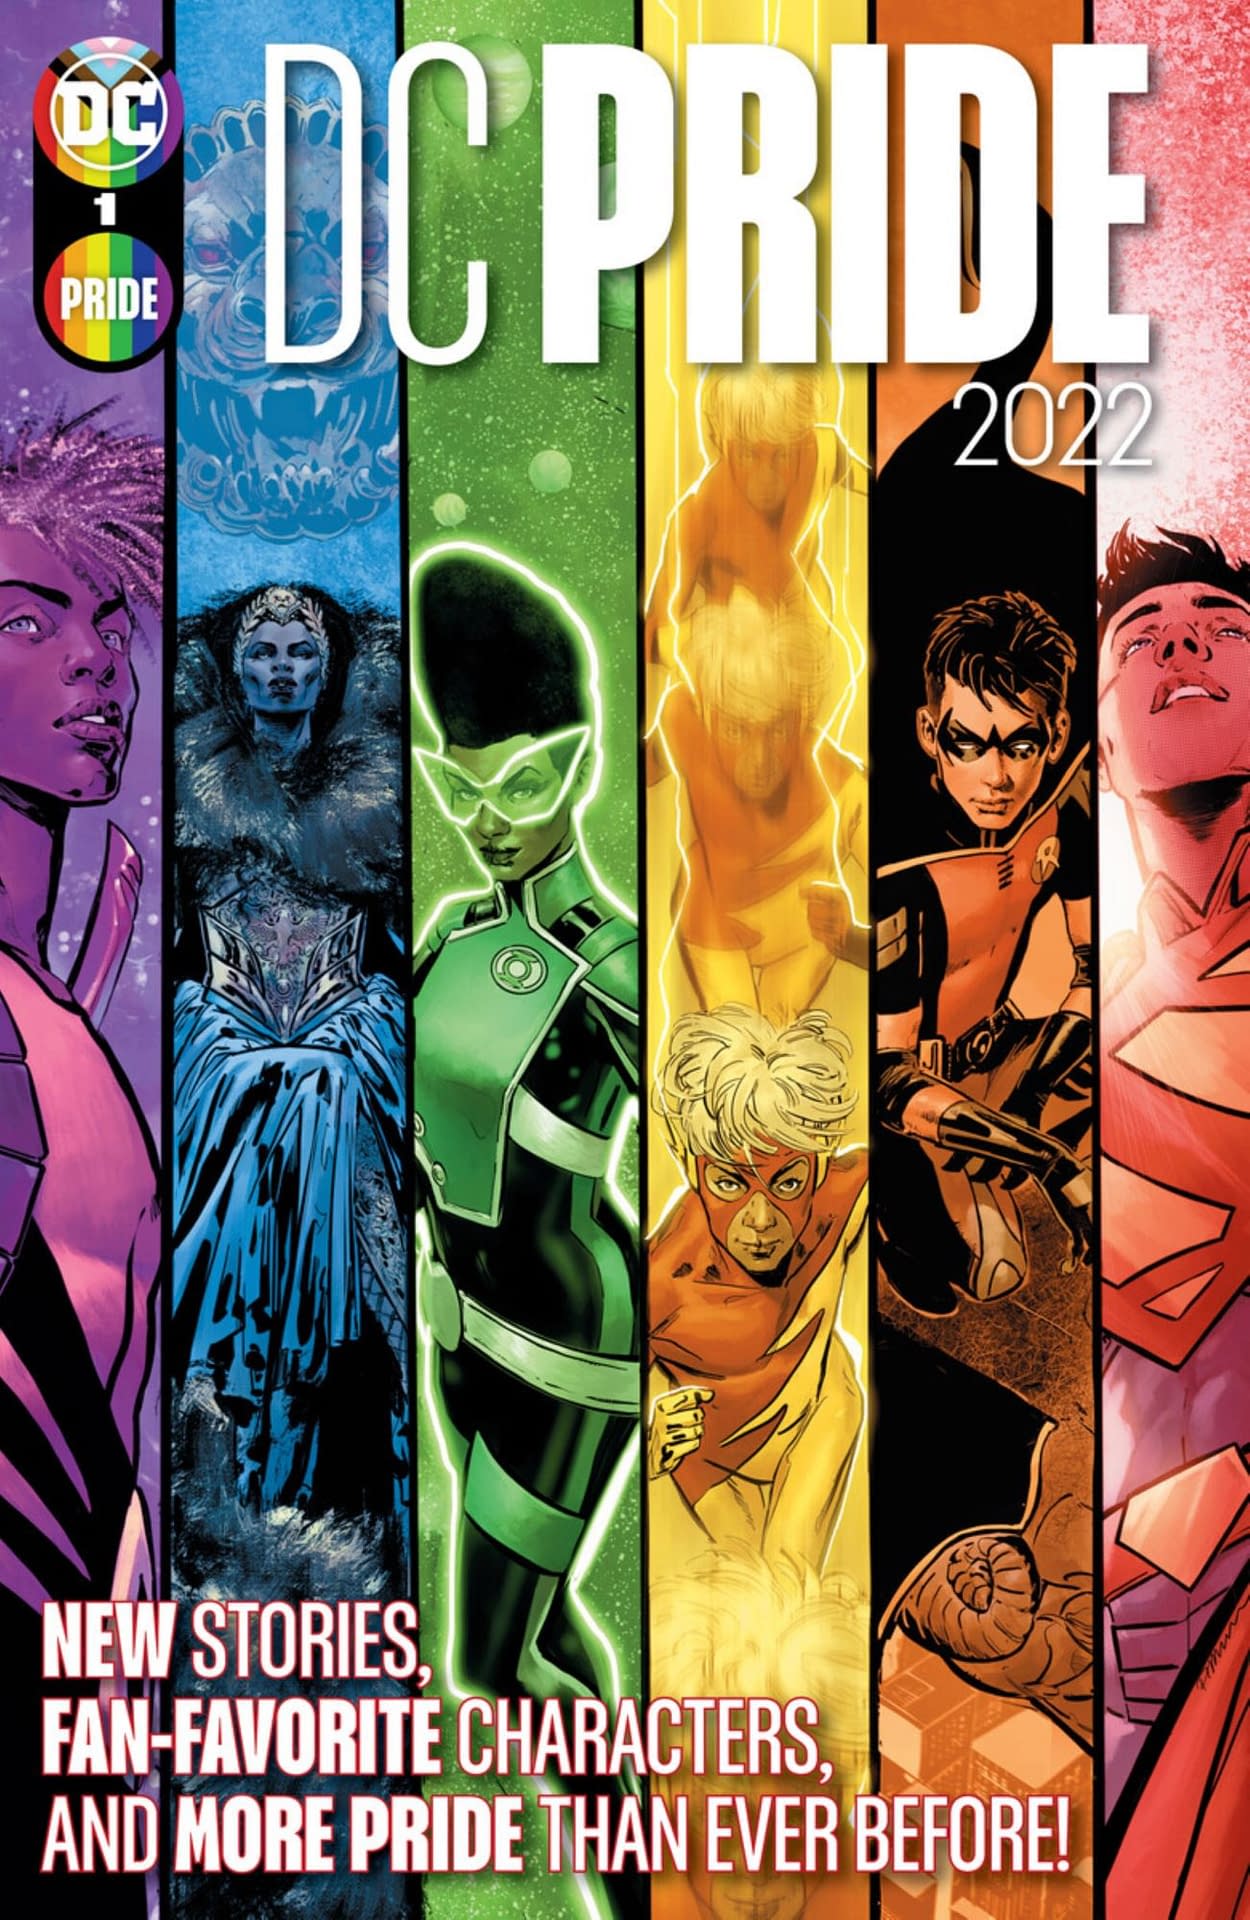 DC To Publish DC Pride 2022 Day & Date on DC Universe Infinite